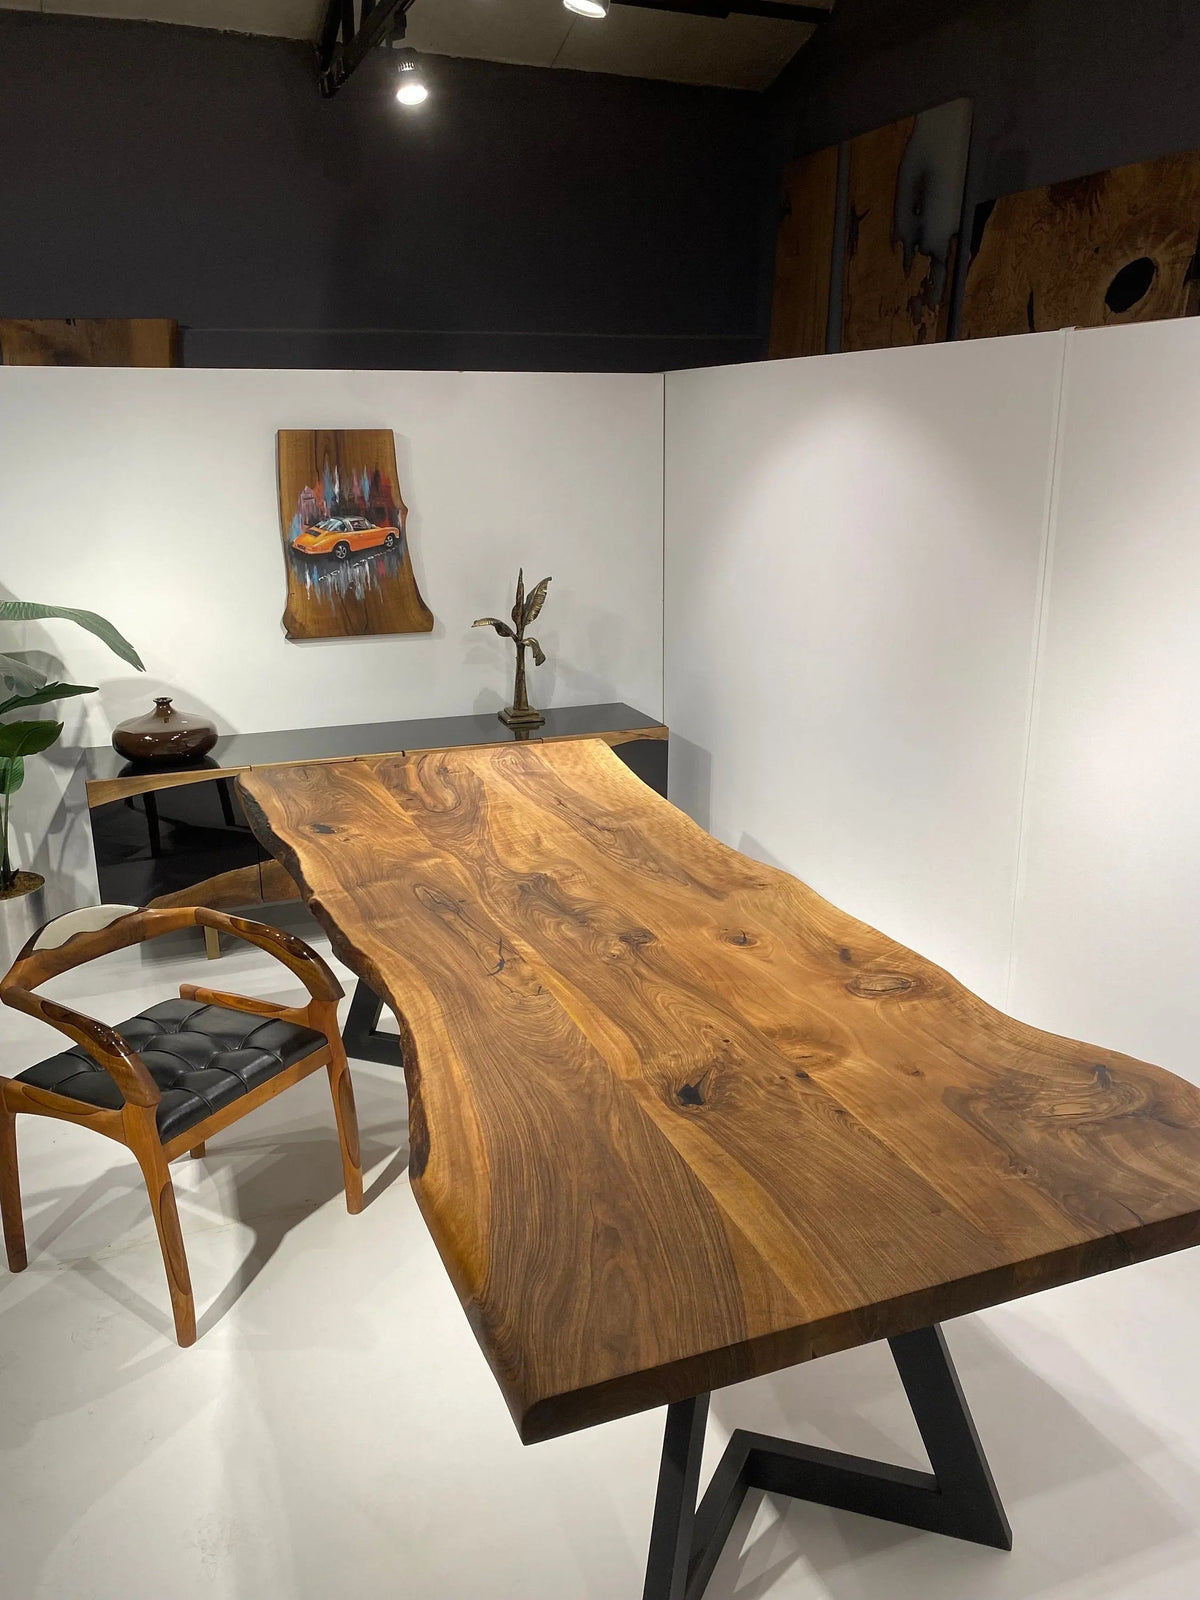 Walnut Kitchen Table | Natural Wooden Dininig Table | Living Room Table On Wooden